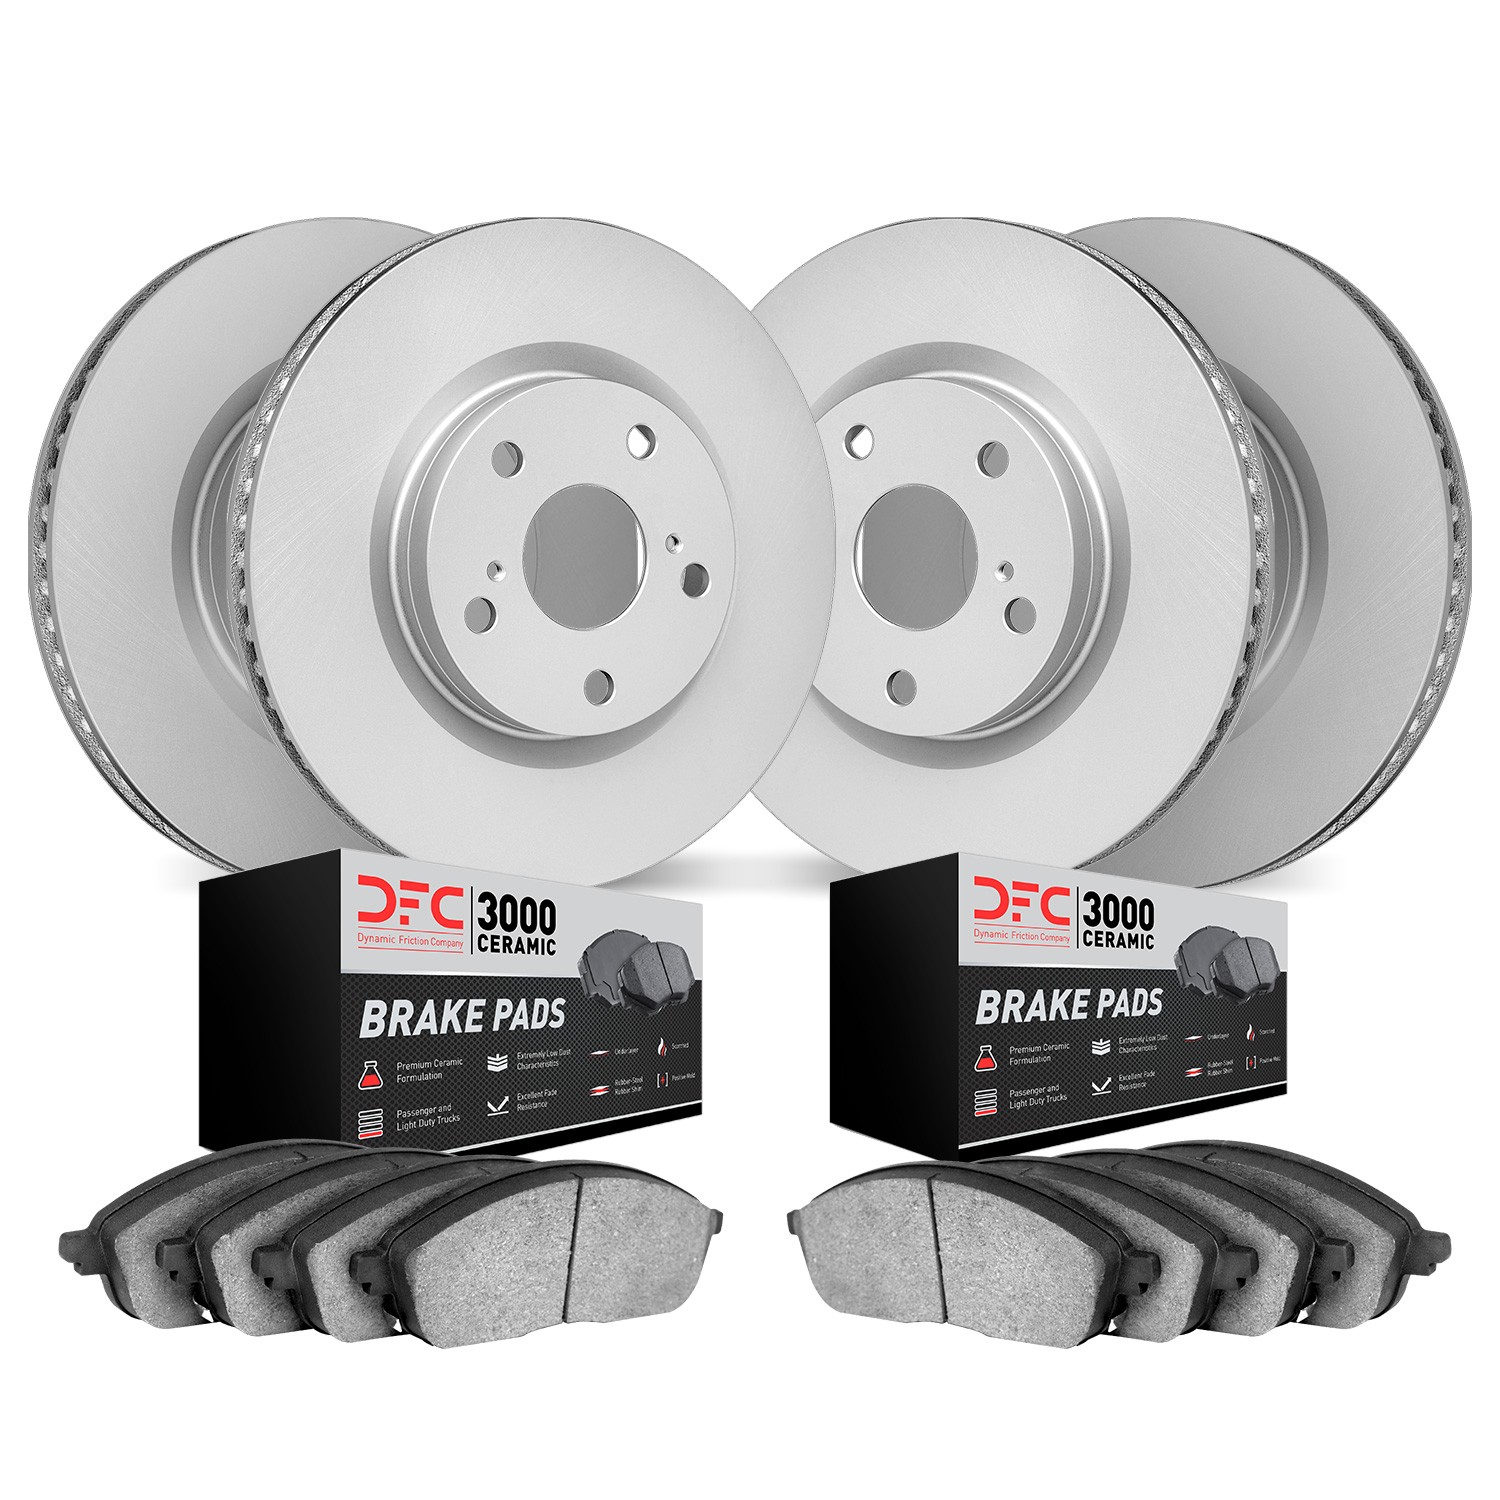 4304-67043 Geospec Brake Rotors with 3000-Series Ceramic Brake Pads Kit, Fits Select Infiniti/Nissan, Position: Front and Rear